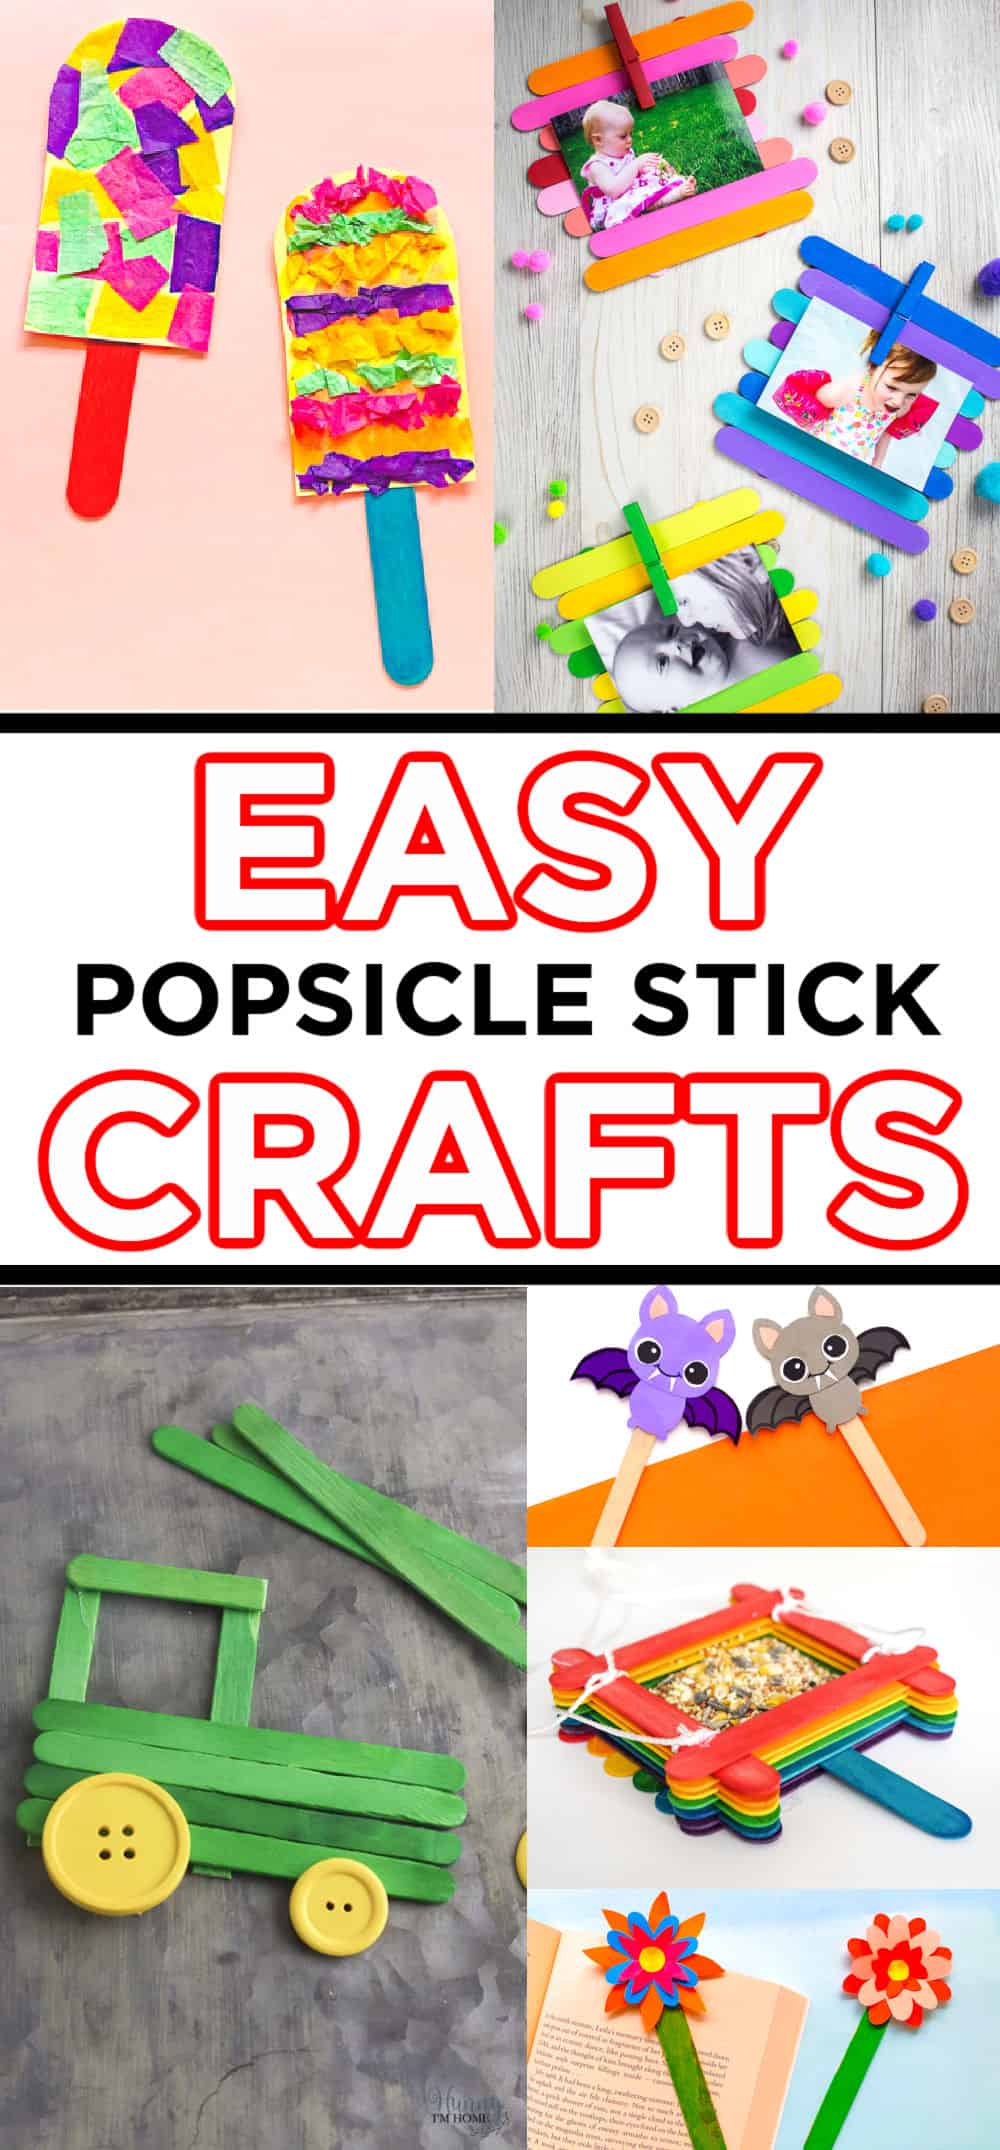 Things To Make With Popsicle Sticks